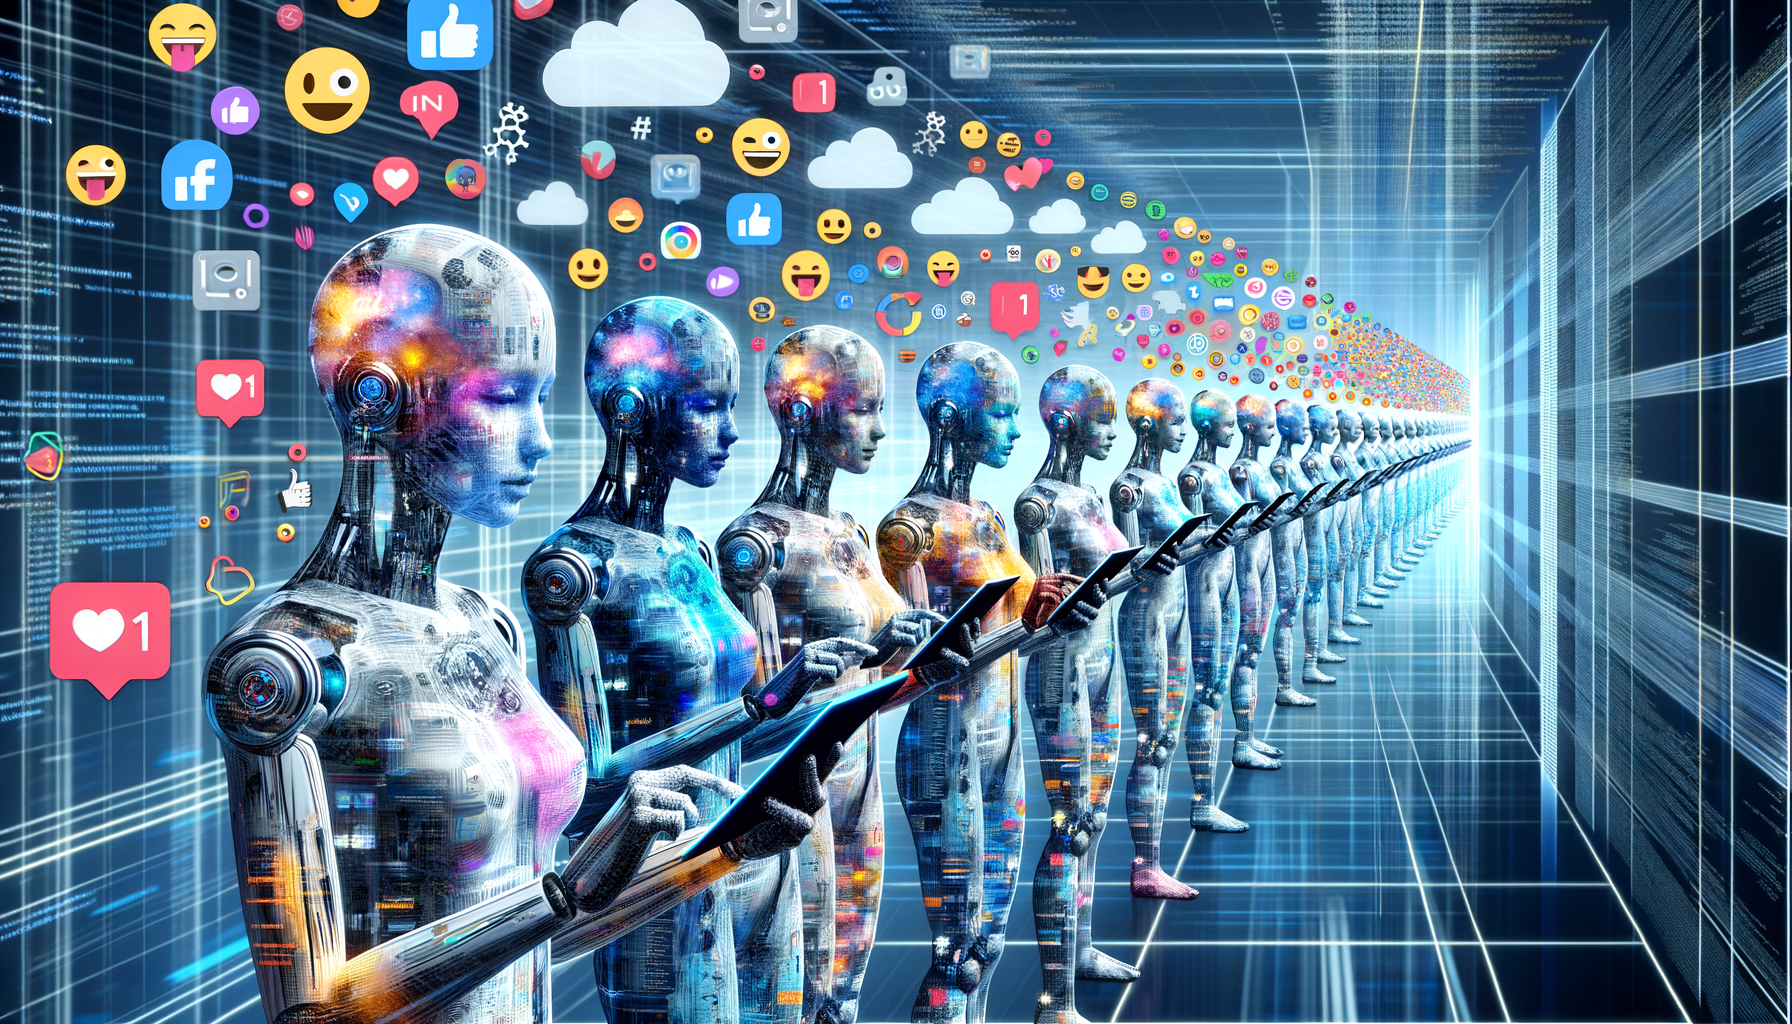 The Impact of AI Personas on the Evolution of Social Media